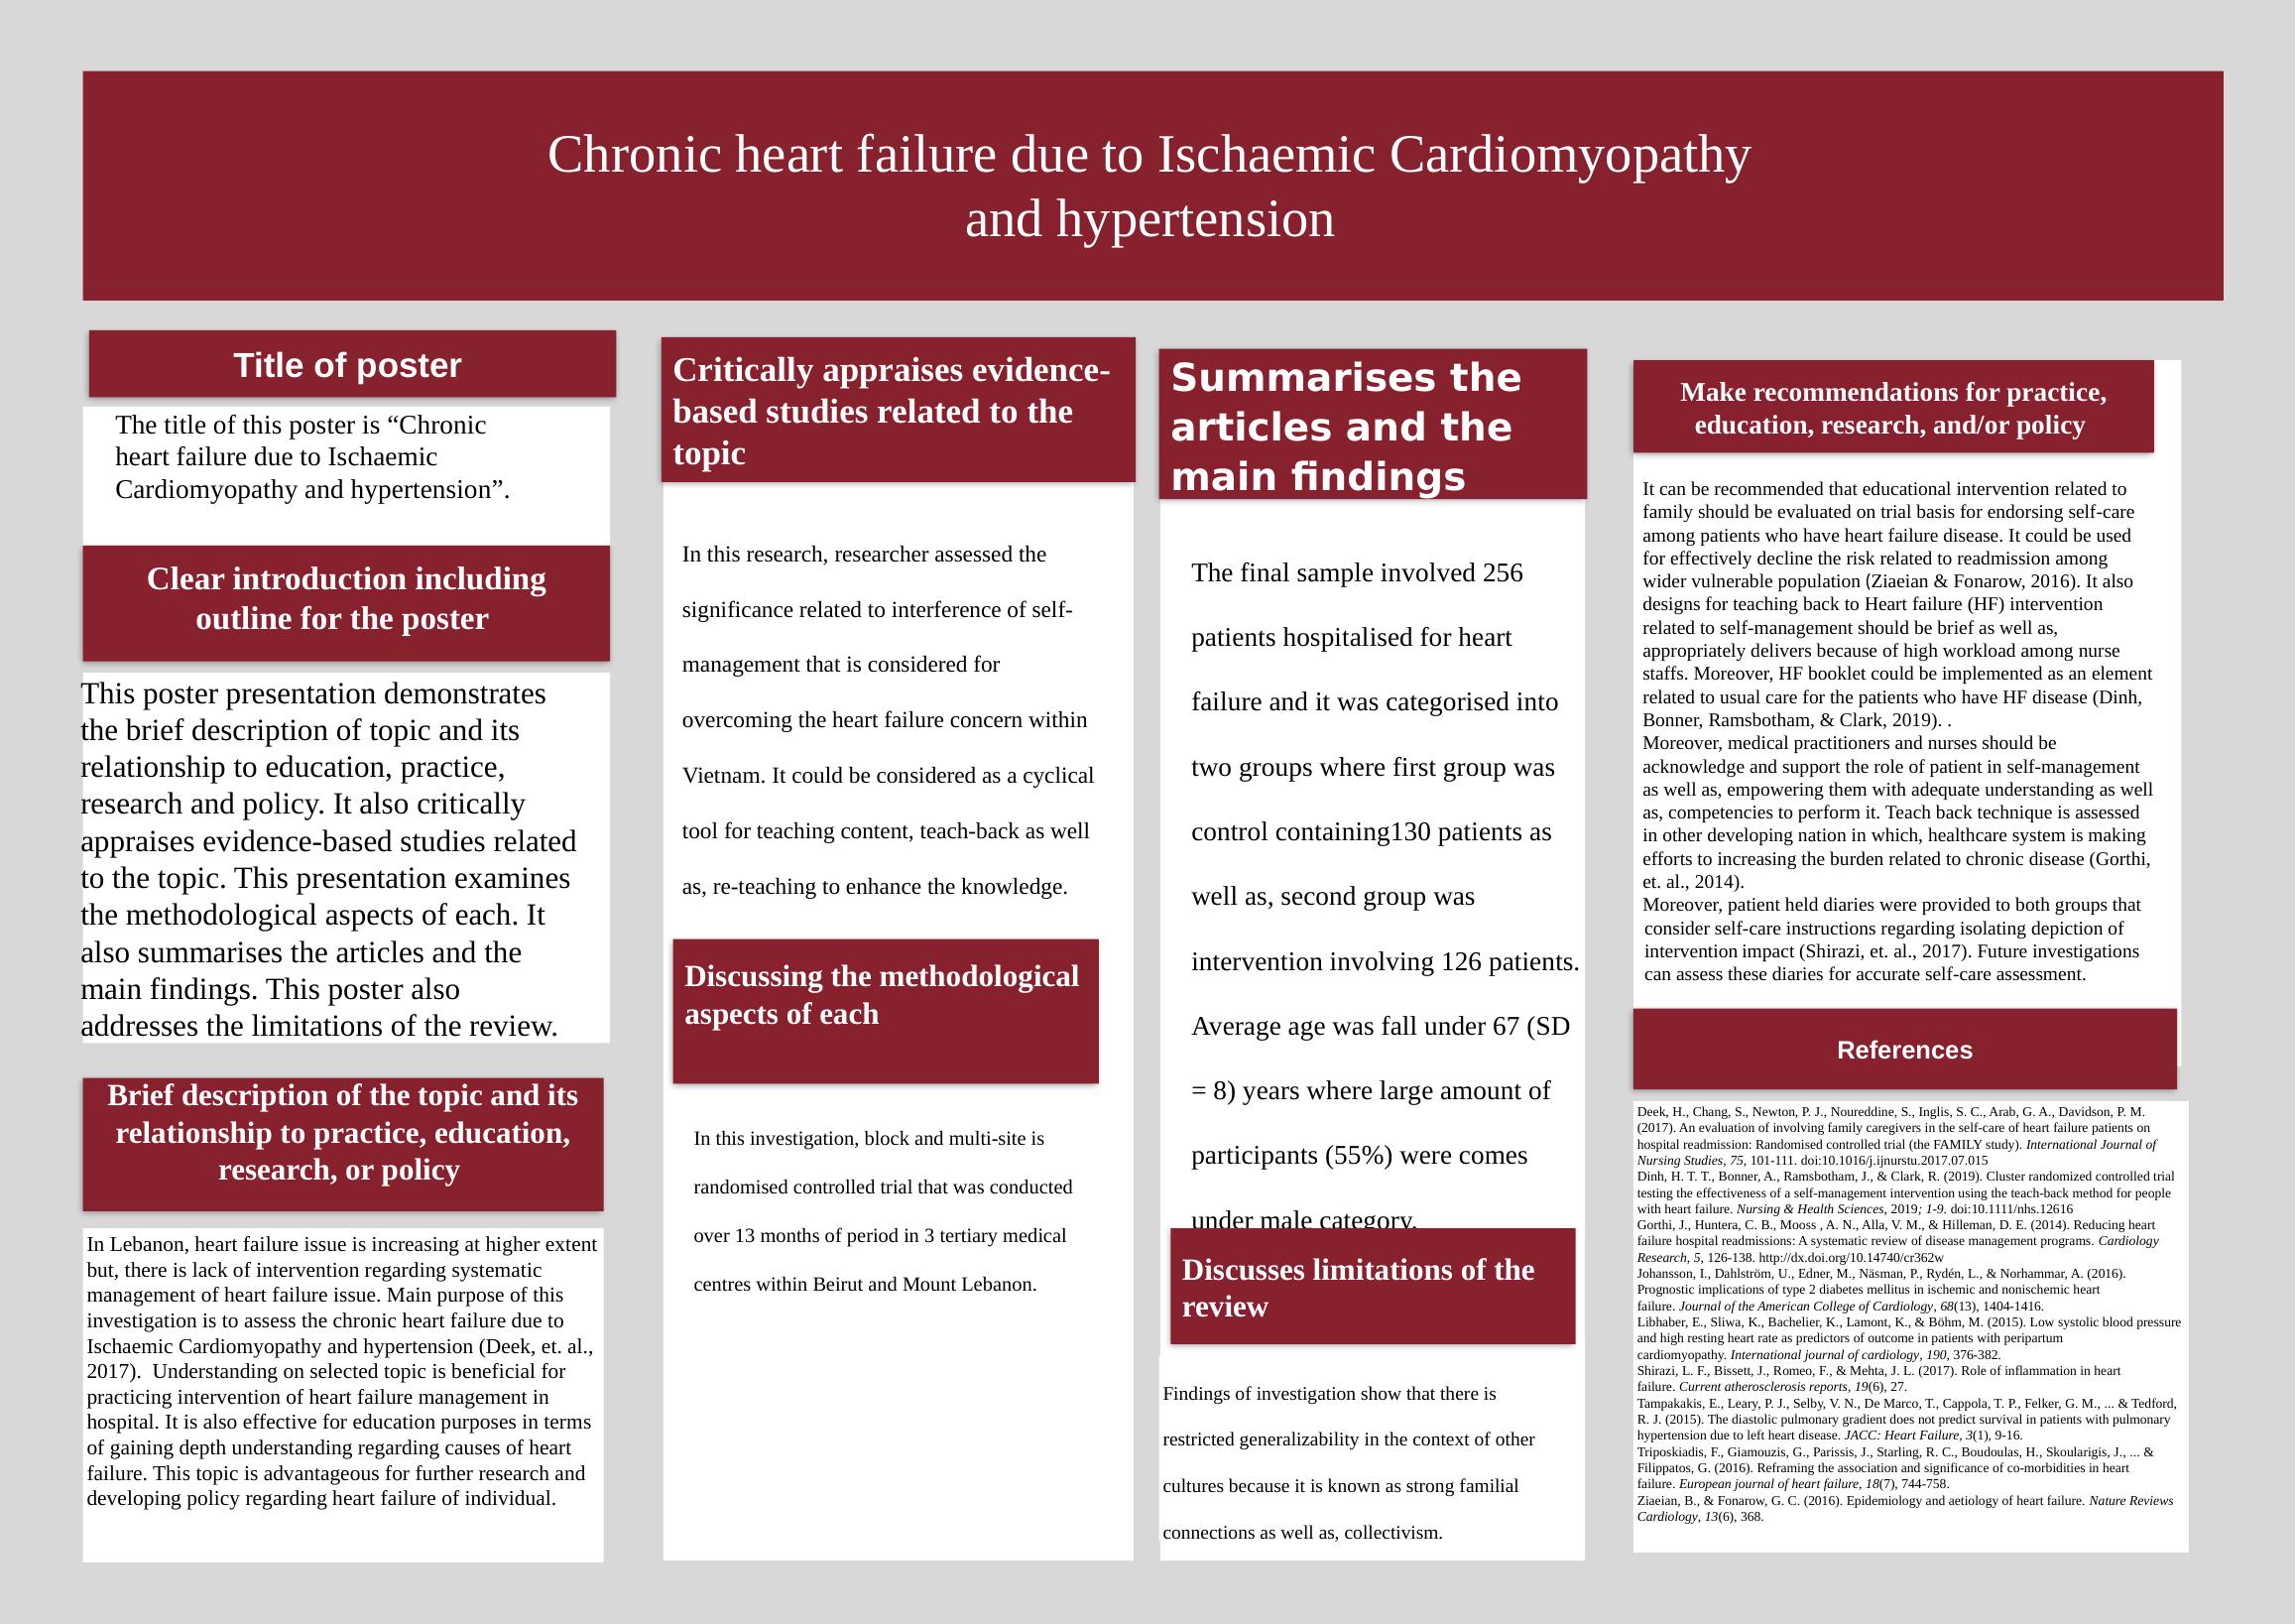 Chronic Heart Failure Due to Ischaemic Cardiomyopathy and Hypertension_1